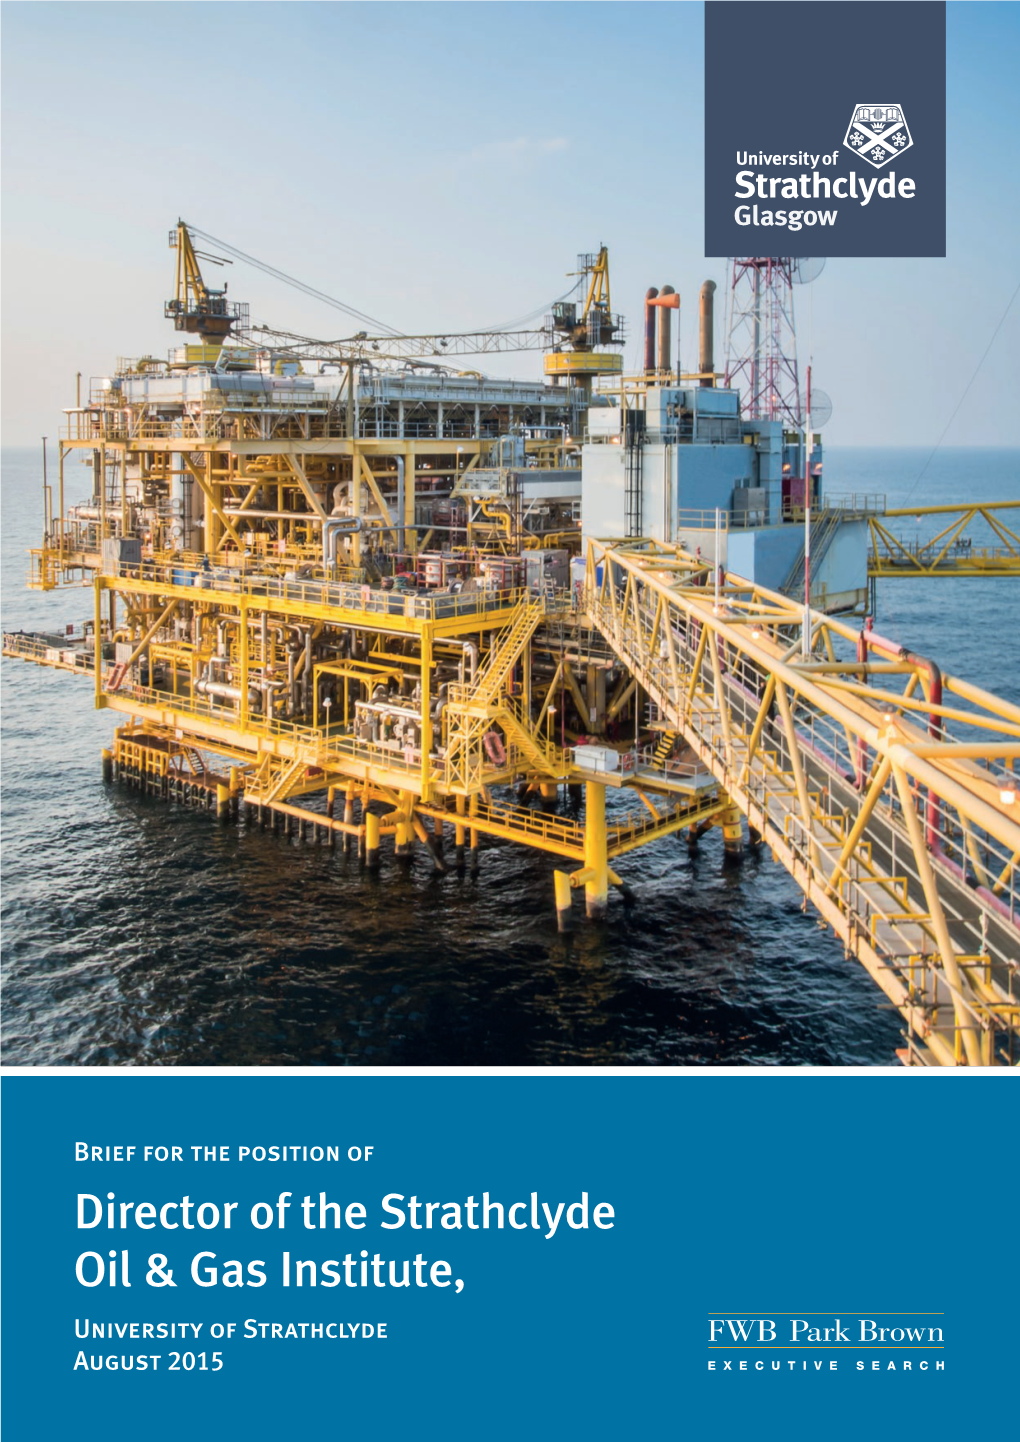 Director of the Strathclyde Oil & Gas Institute